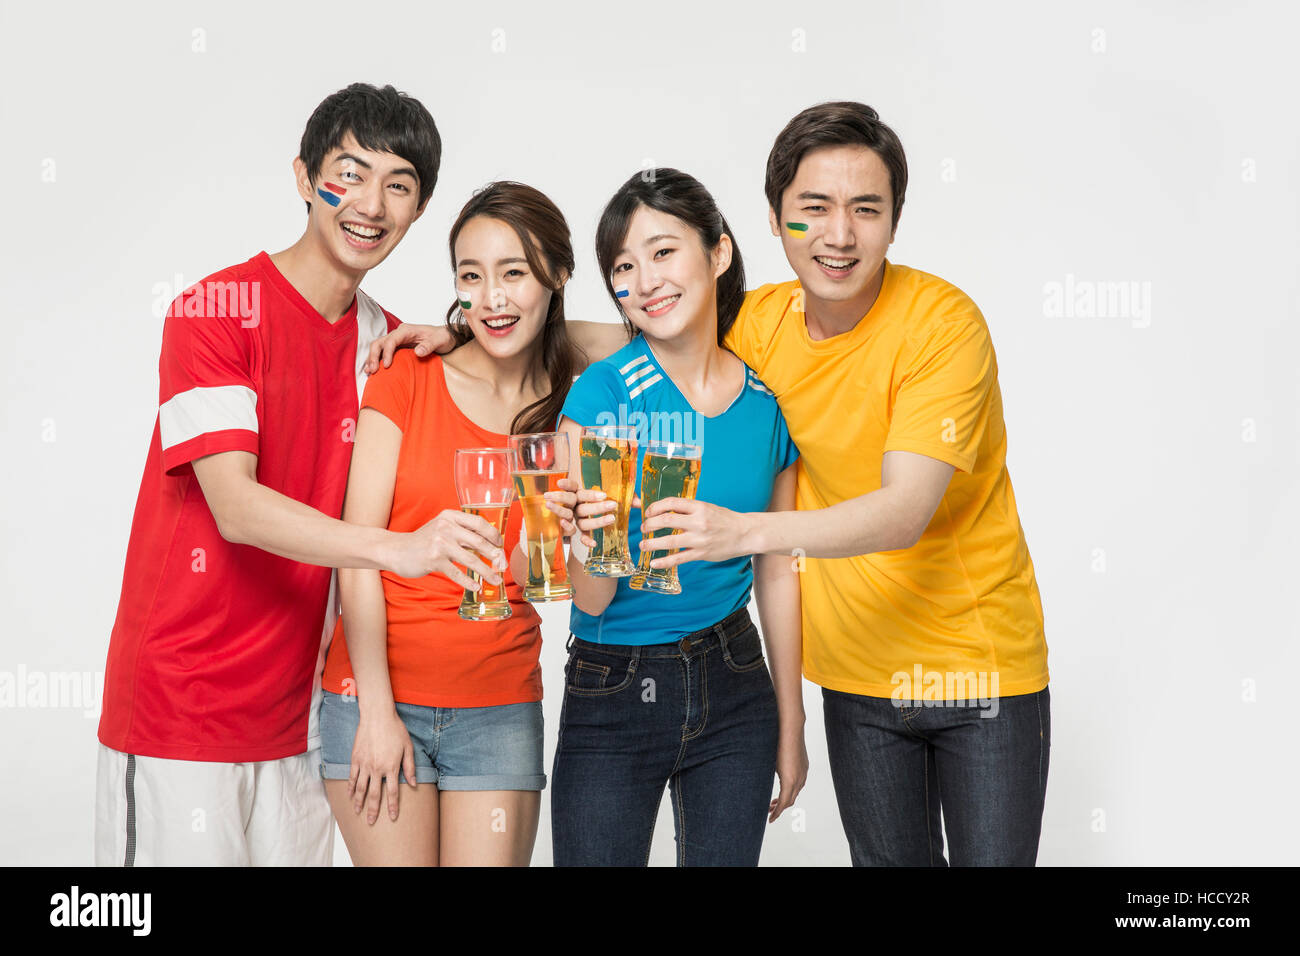 Young smiling people with beer glasses cheering Stock Photo